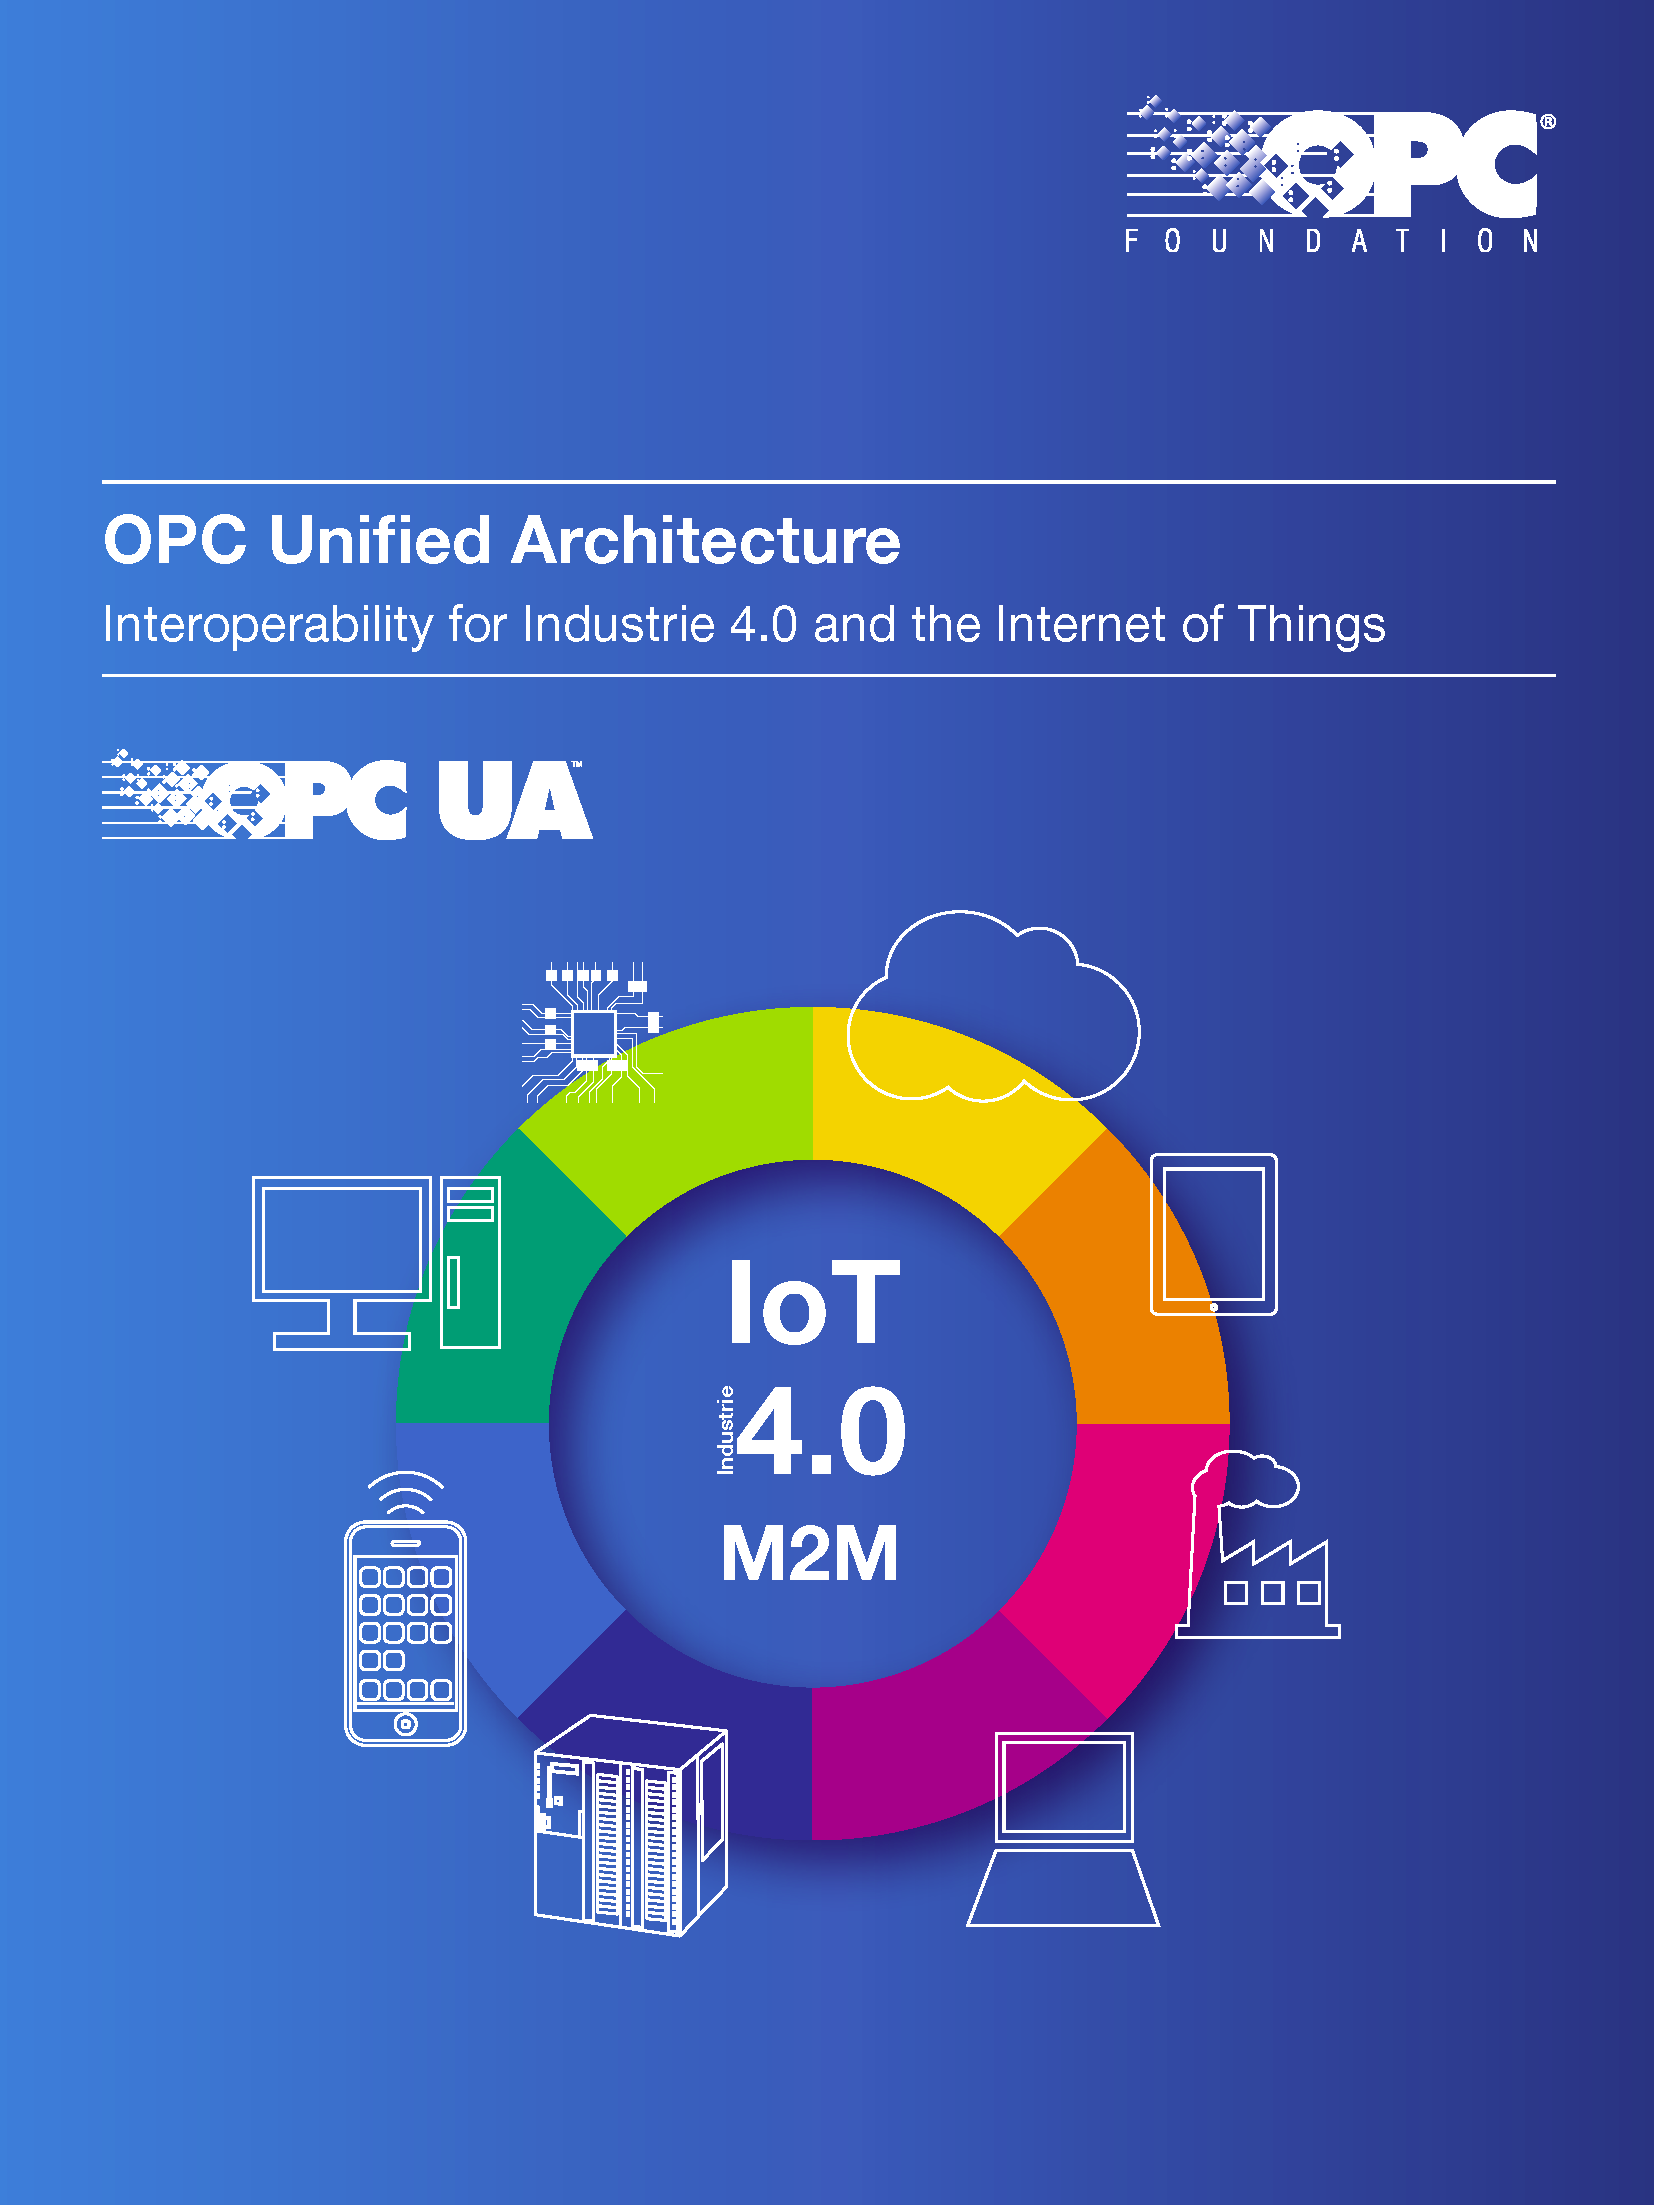 OPC Unified Architecture: Interoperability for Industrie 4.0 and the Internet of Things